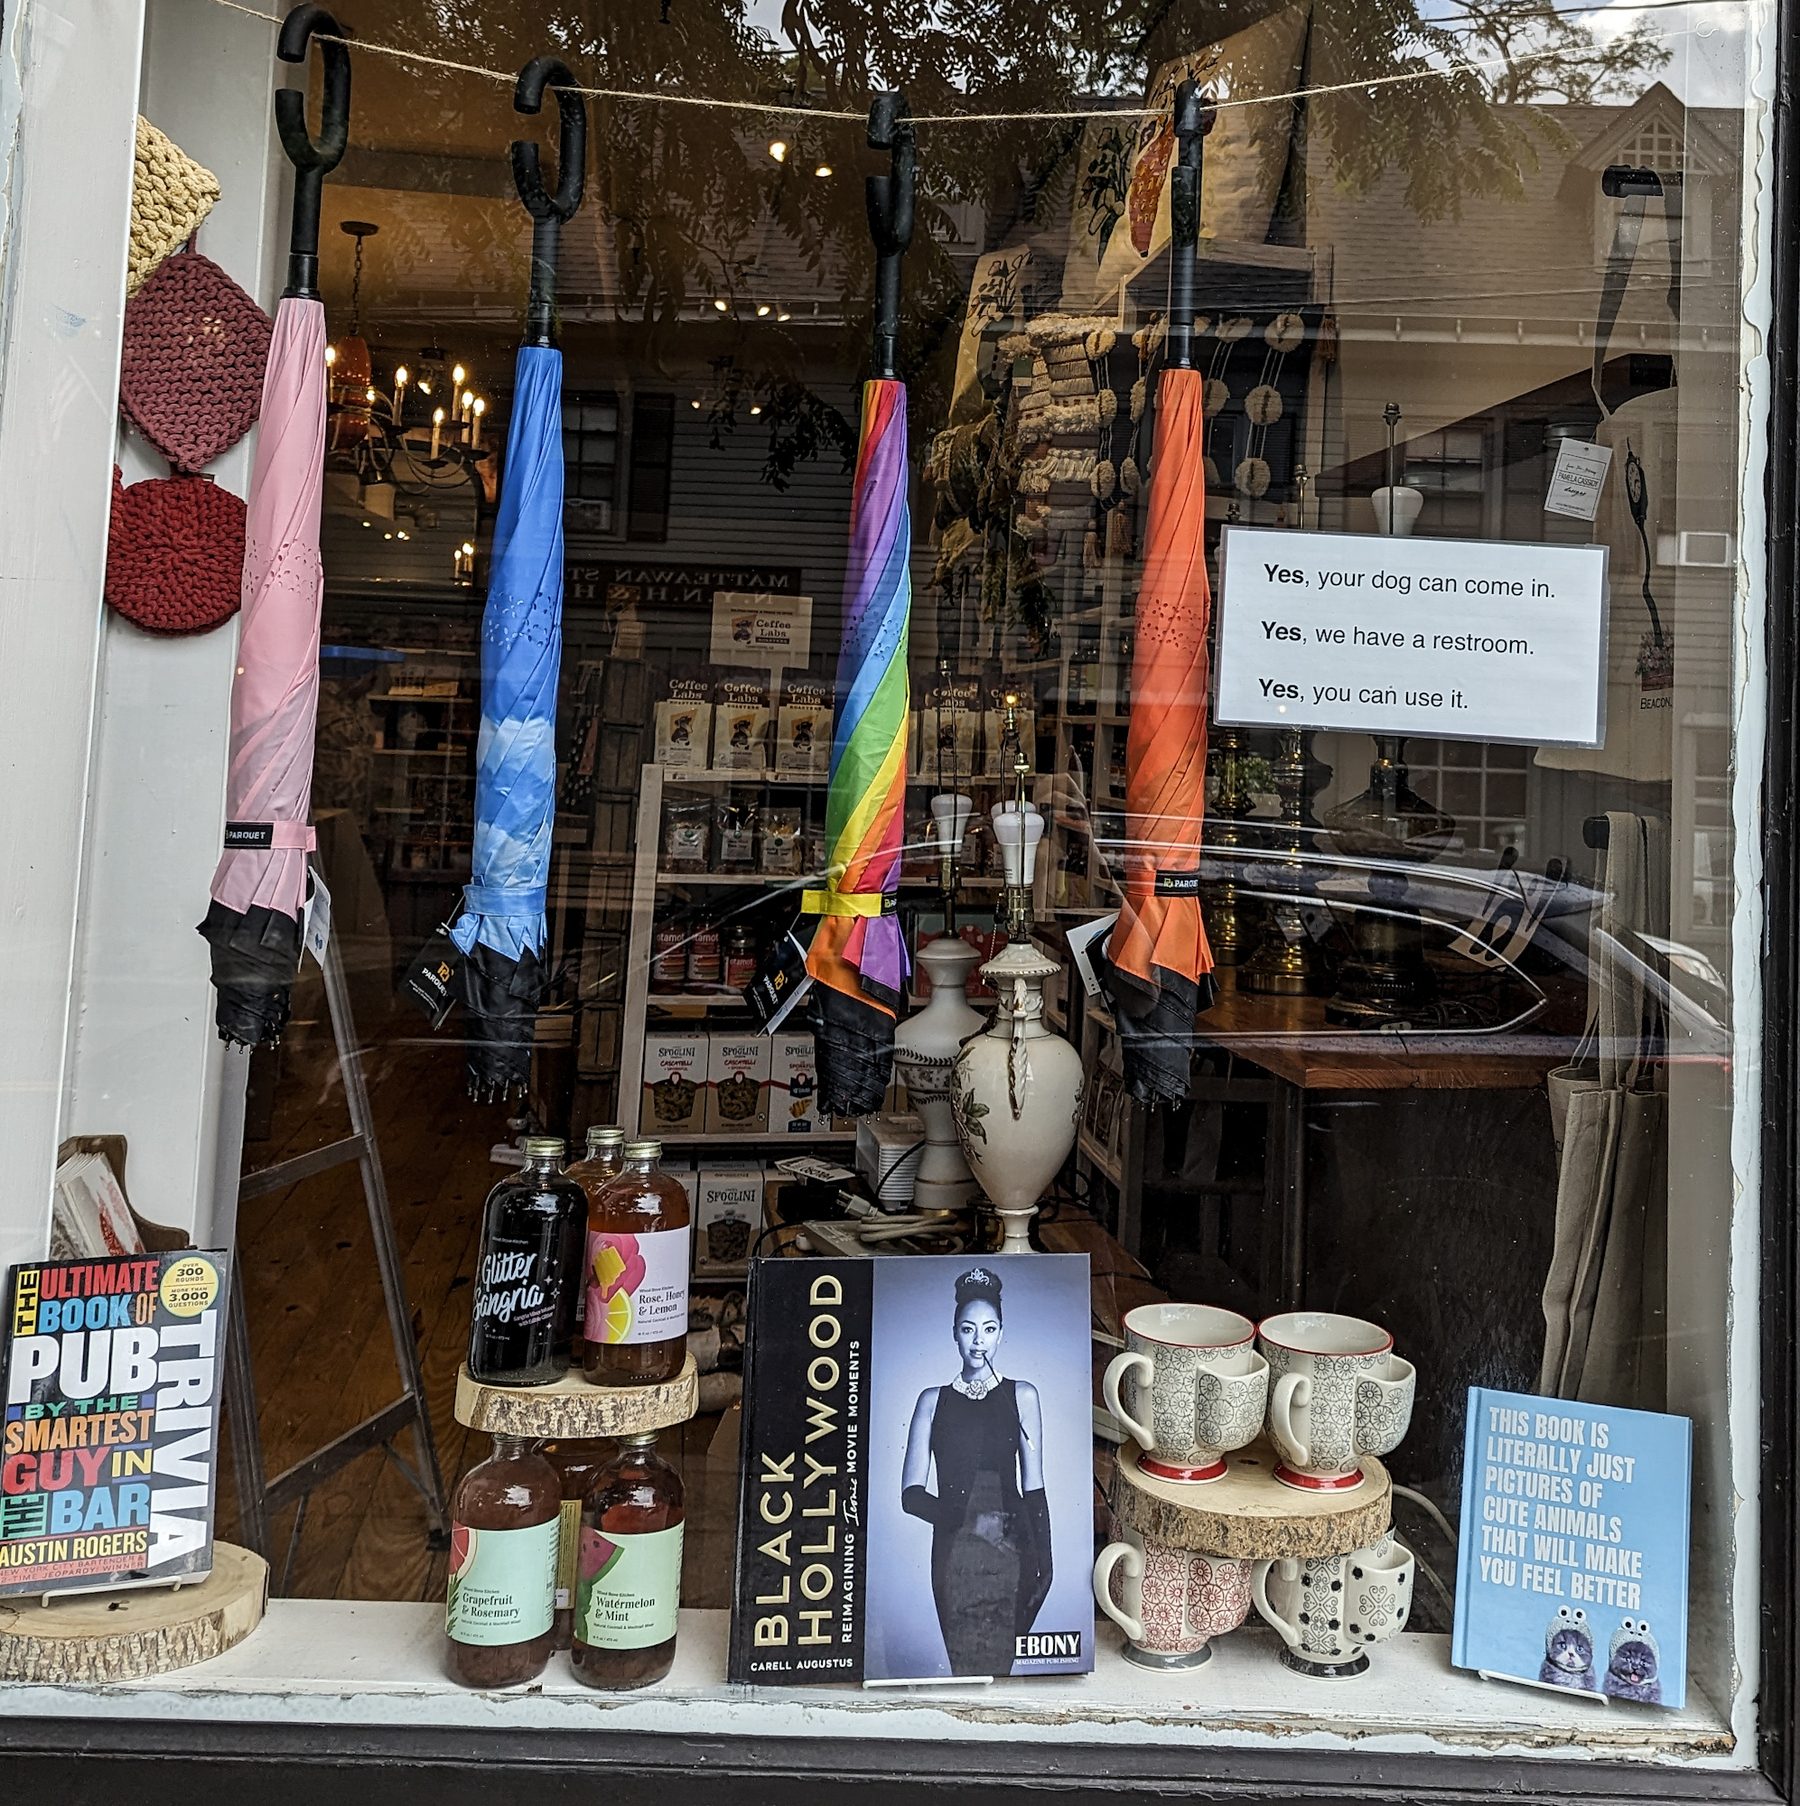 A store window with three colorful umbrellas hanging from a rope, a couple of mugs and a book. A sign reads "Yes your dog can come in. Yes we have a restroom. Yes you can use it."